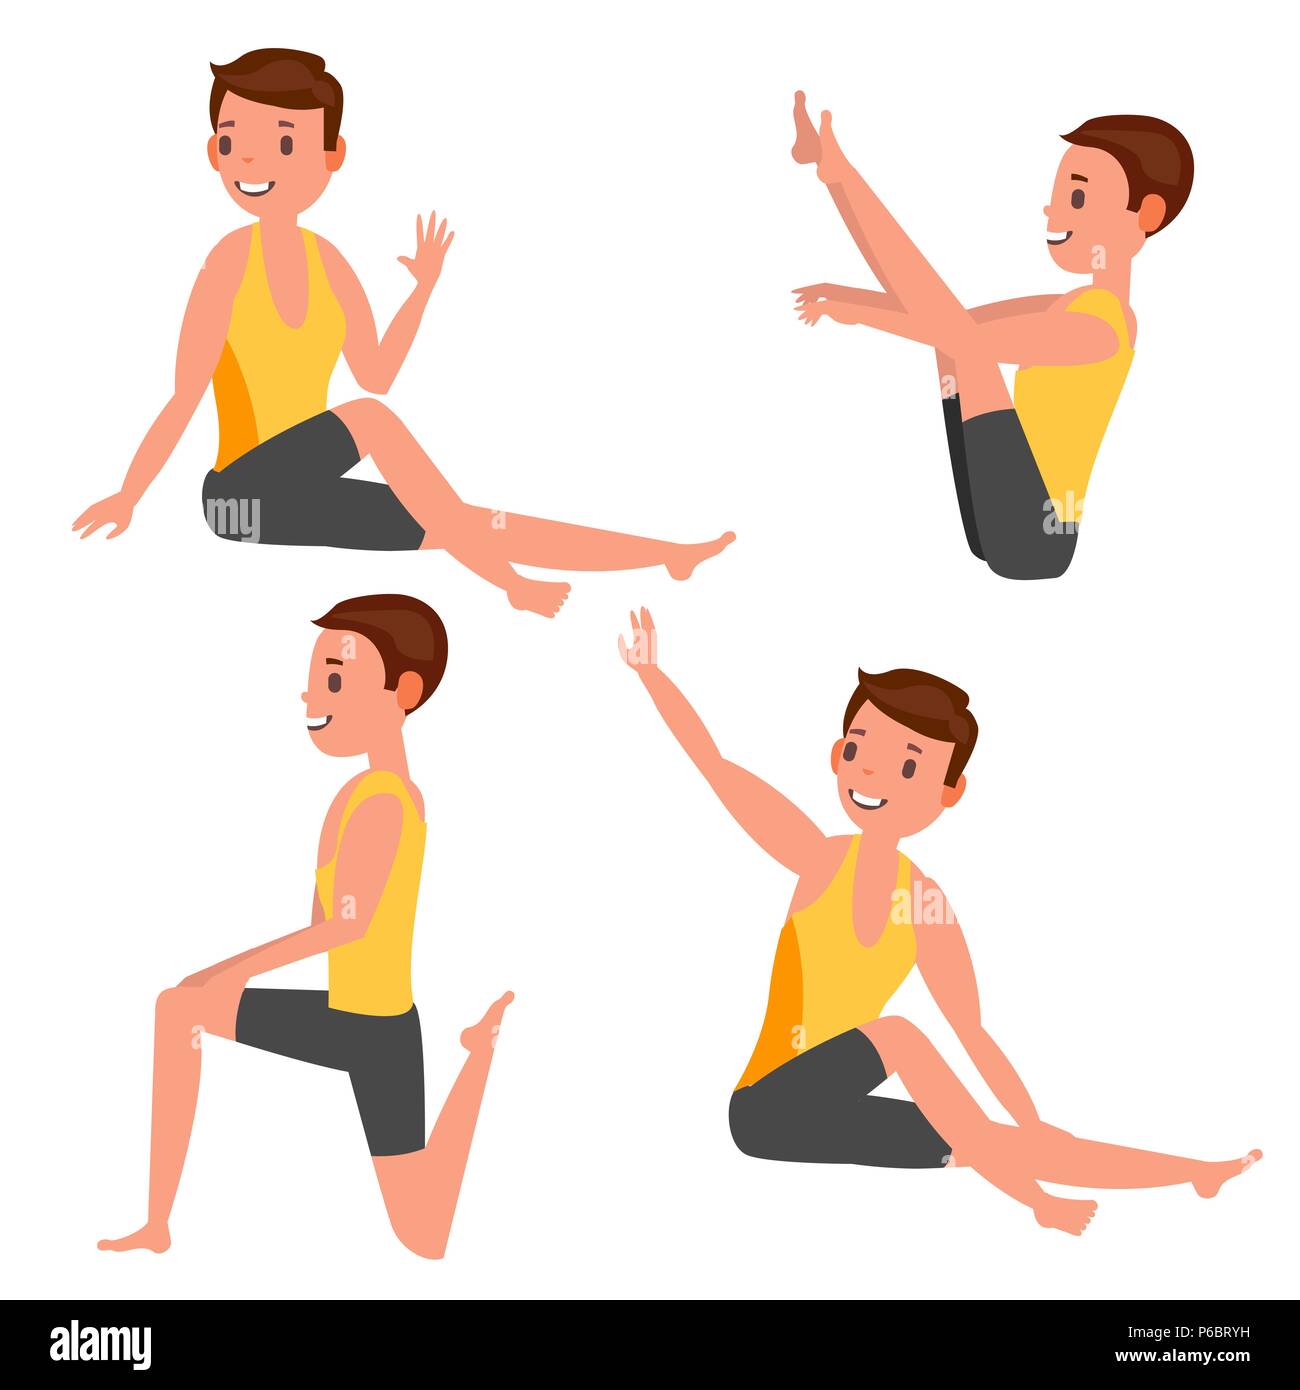 6 Yoga Poses or Asana Posture for Workout in Flatter Belly Concept. Women  Exercising for Body Stretching. Fitness Infog… | Fitness infographic, Yoga  poses, Exercise